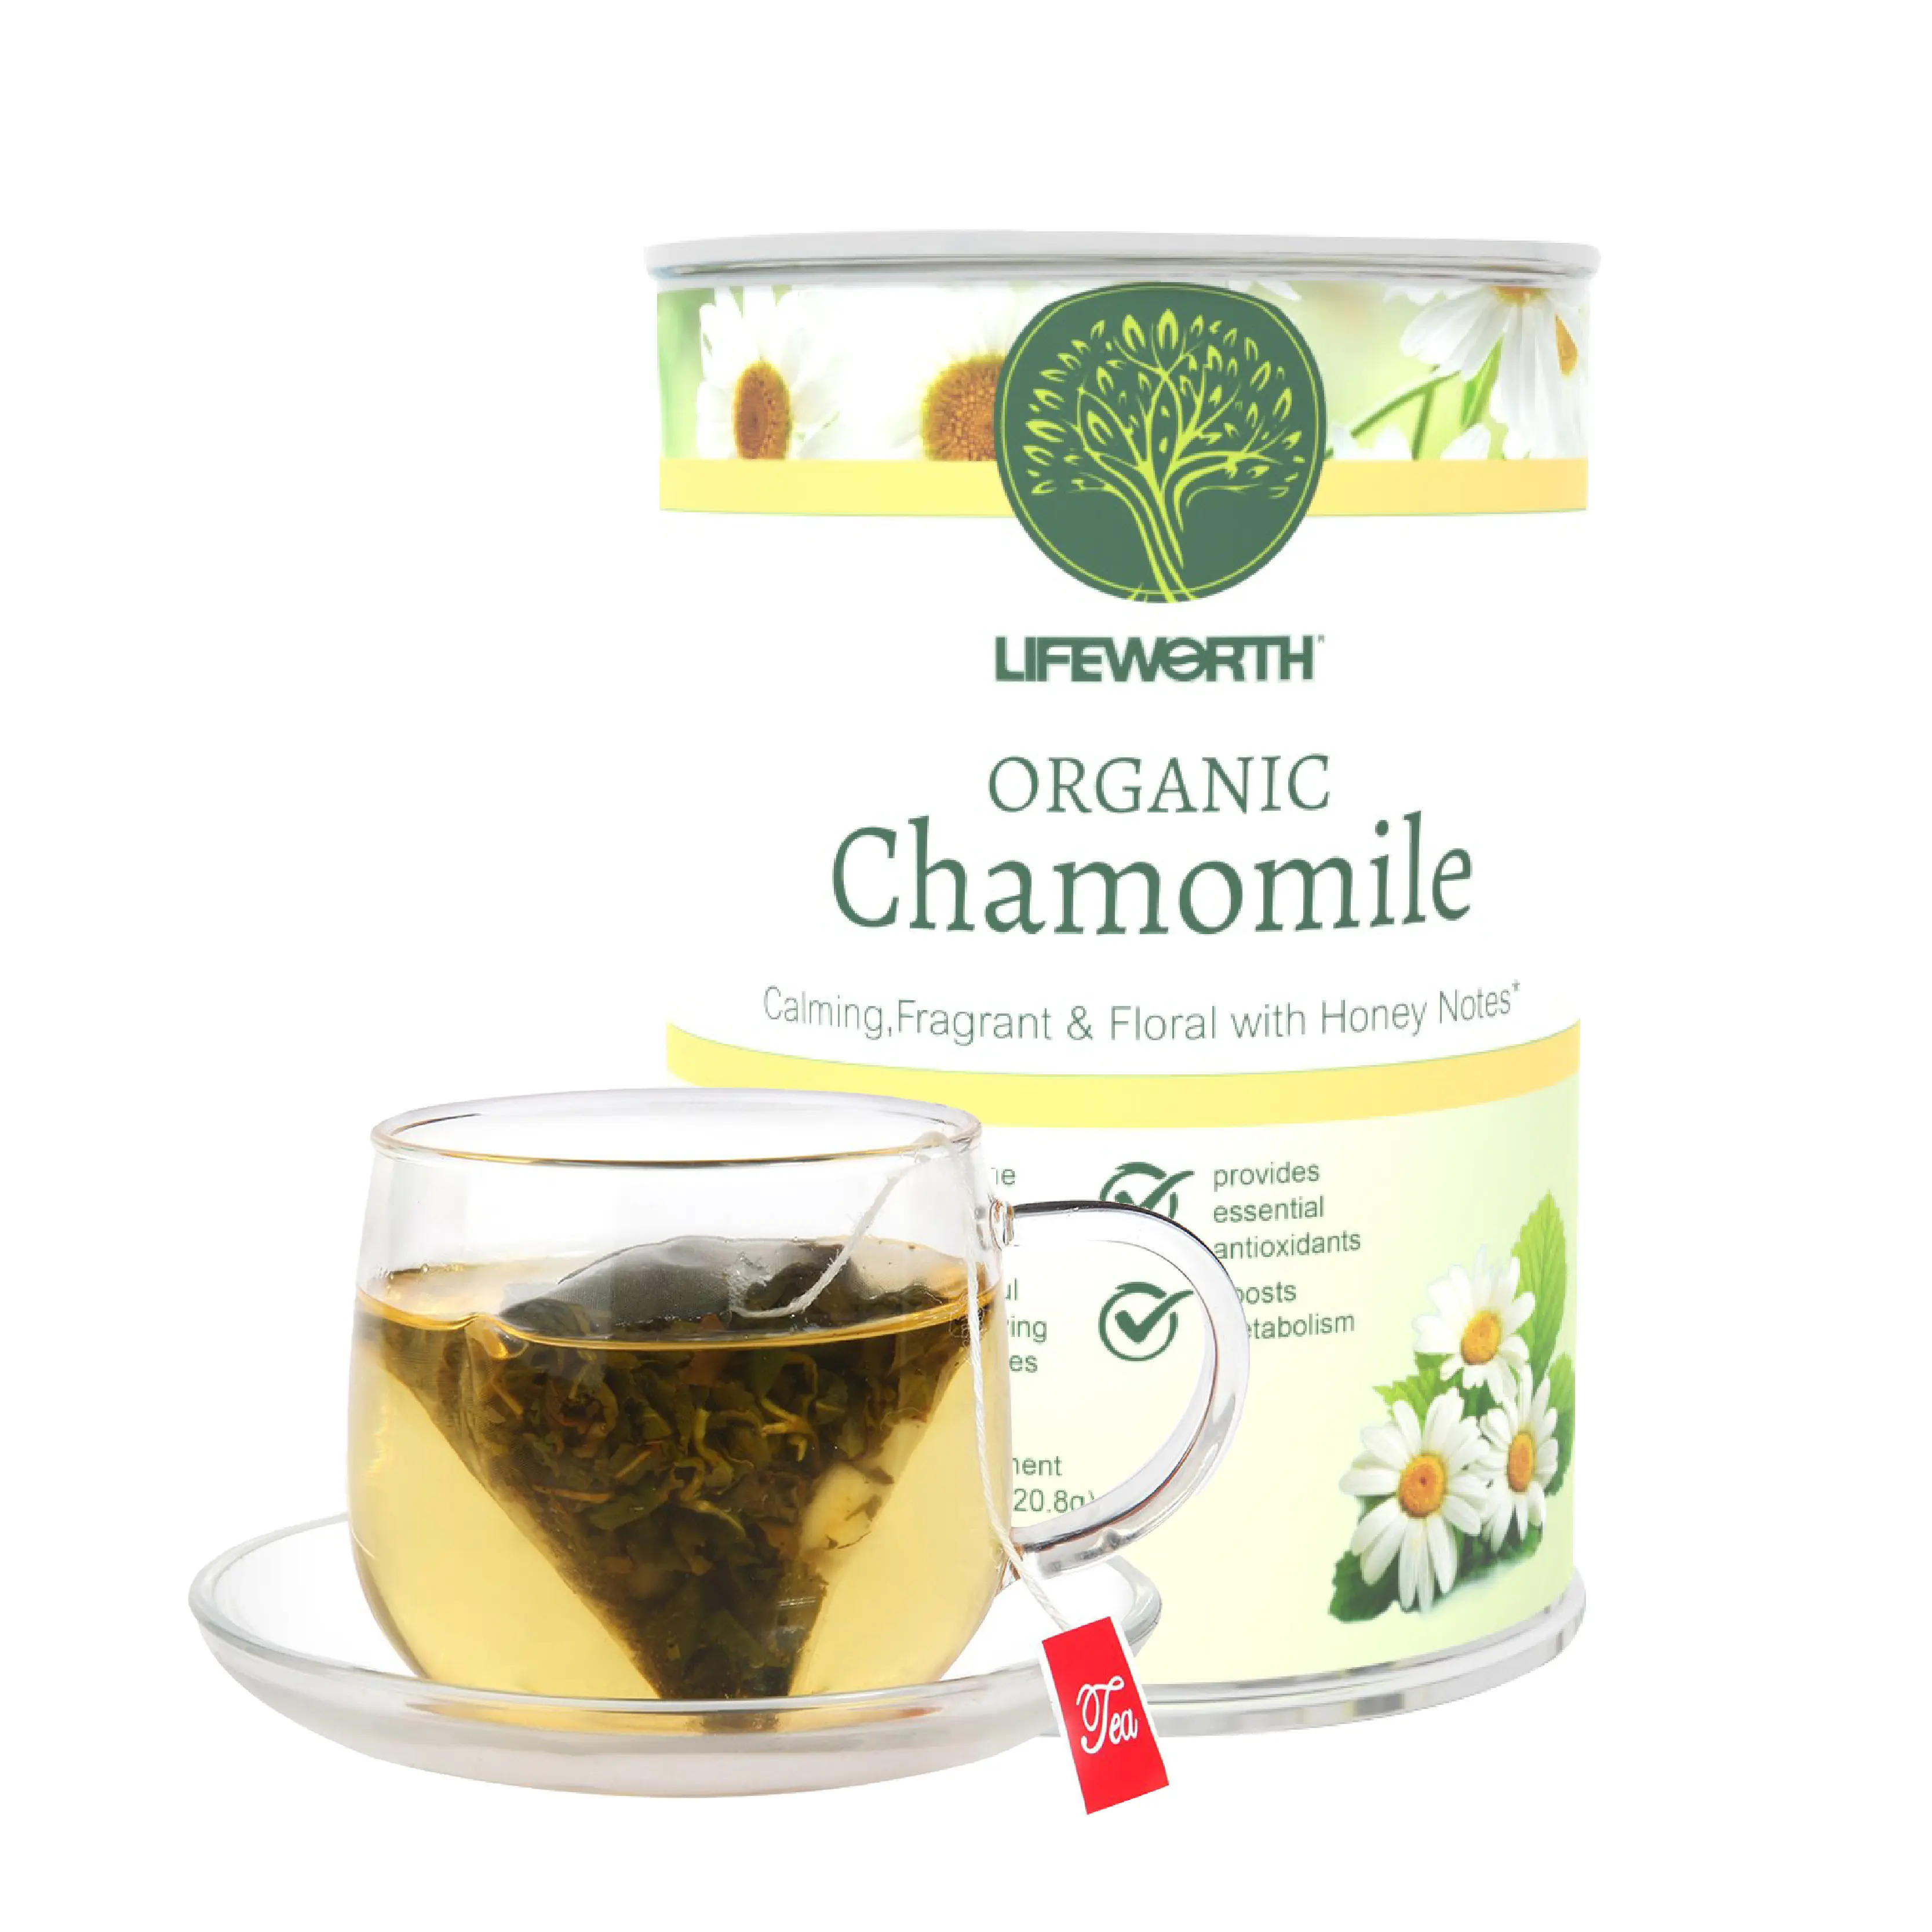 Lifeworth Private Label Organic Chamomile Sleepy Time Tea Herbal Tea For Soothing And Relaxing Sleep Aid Tea